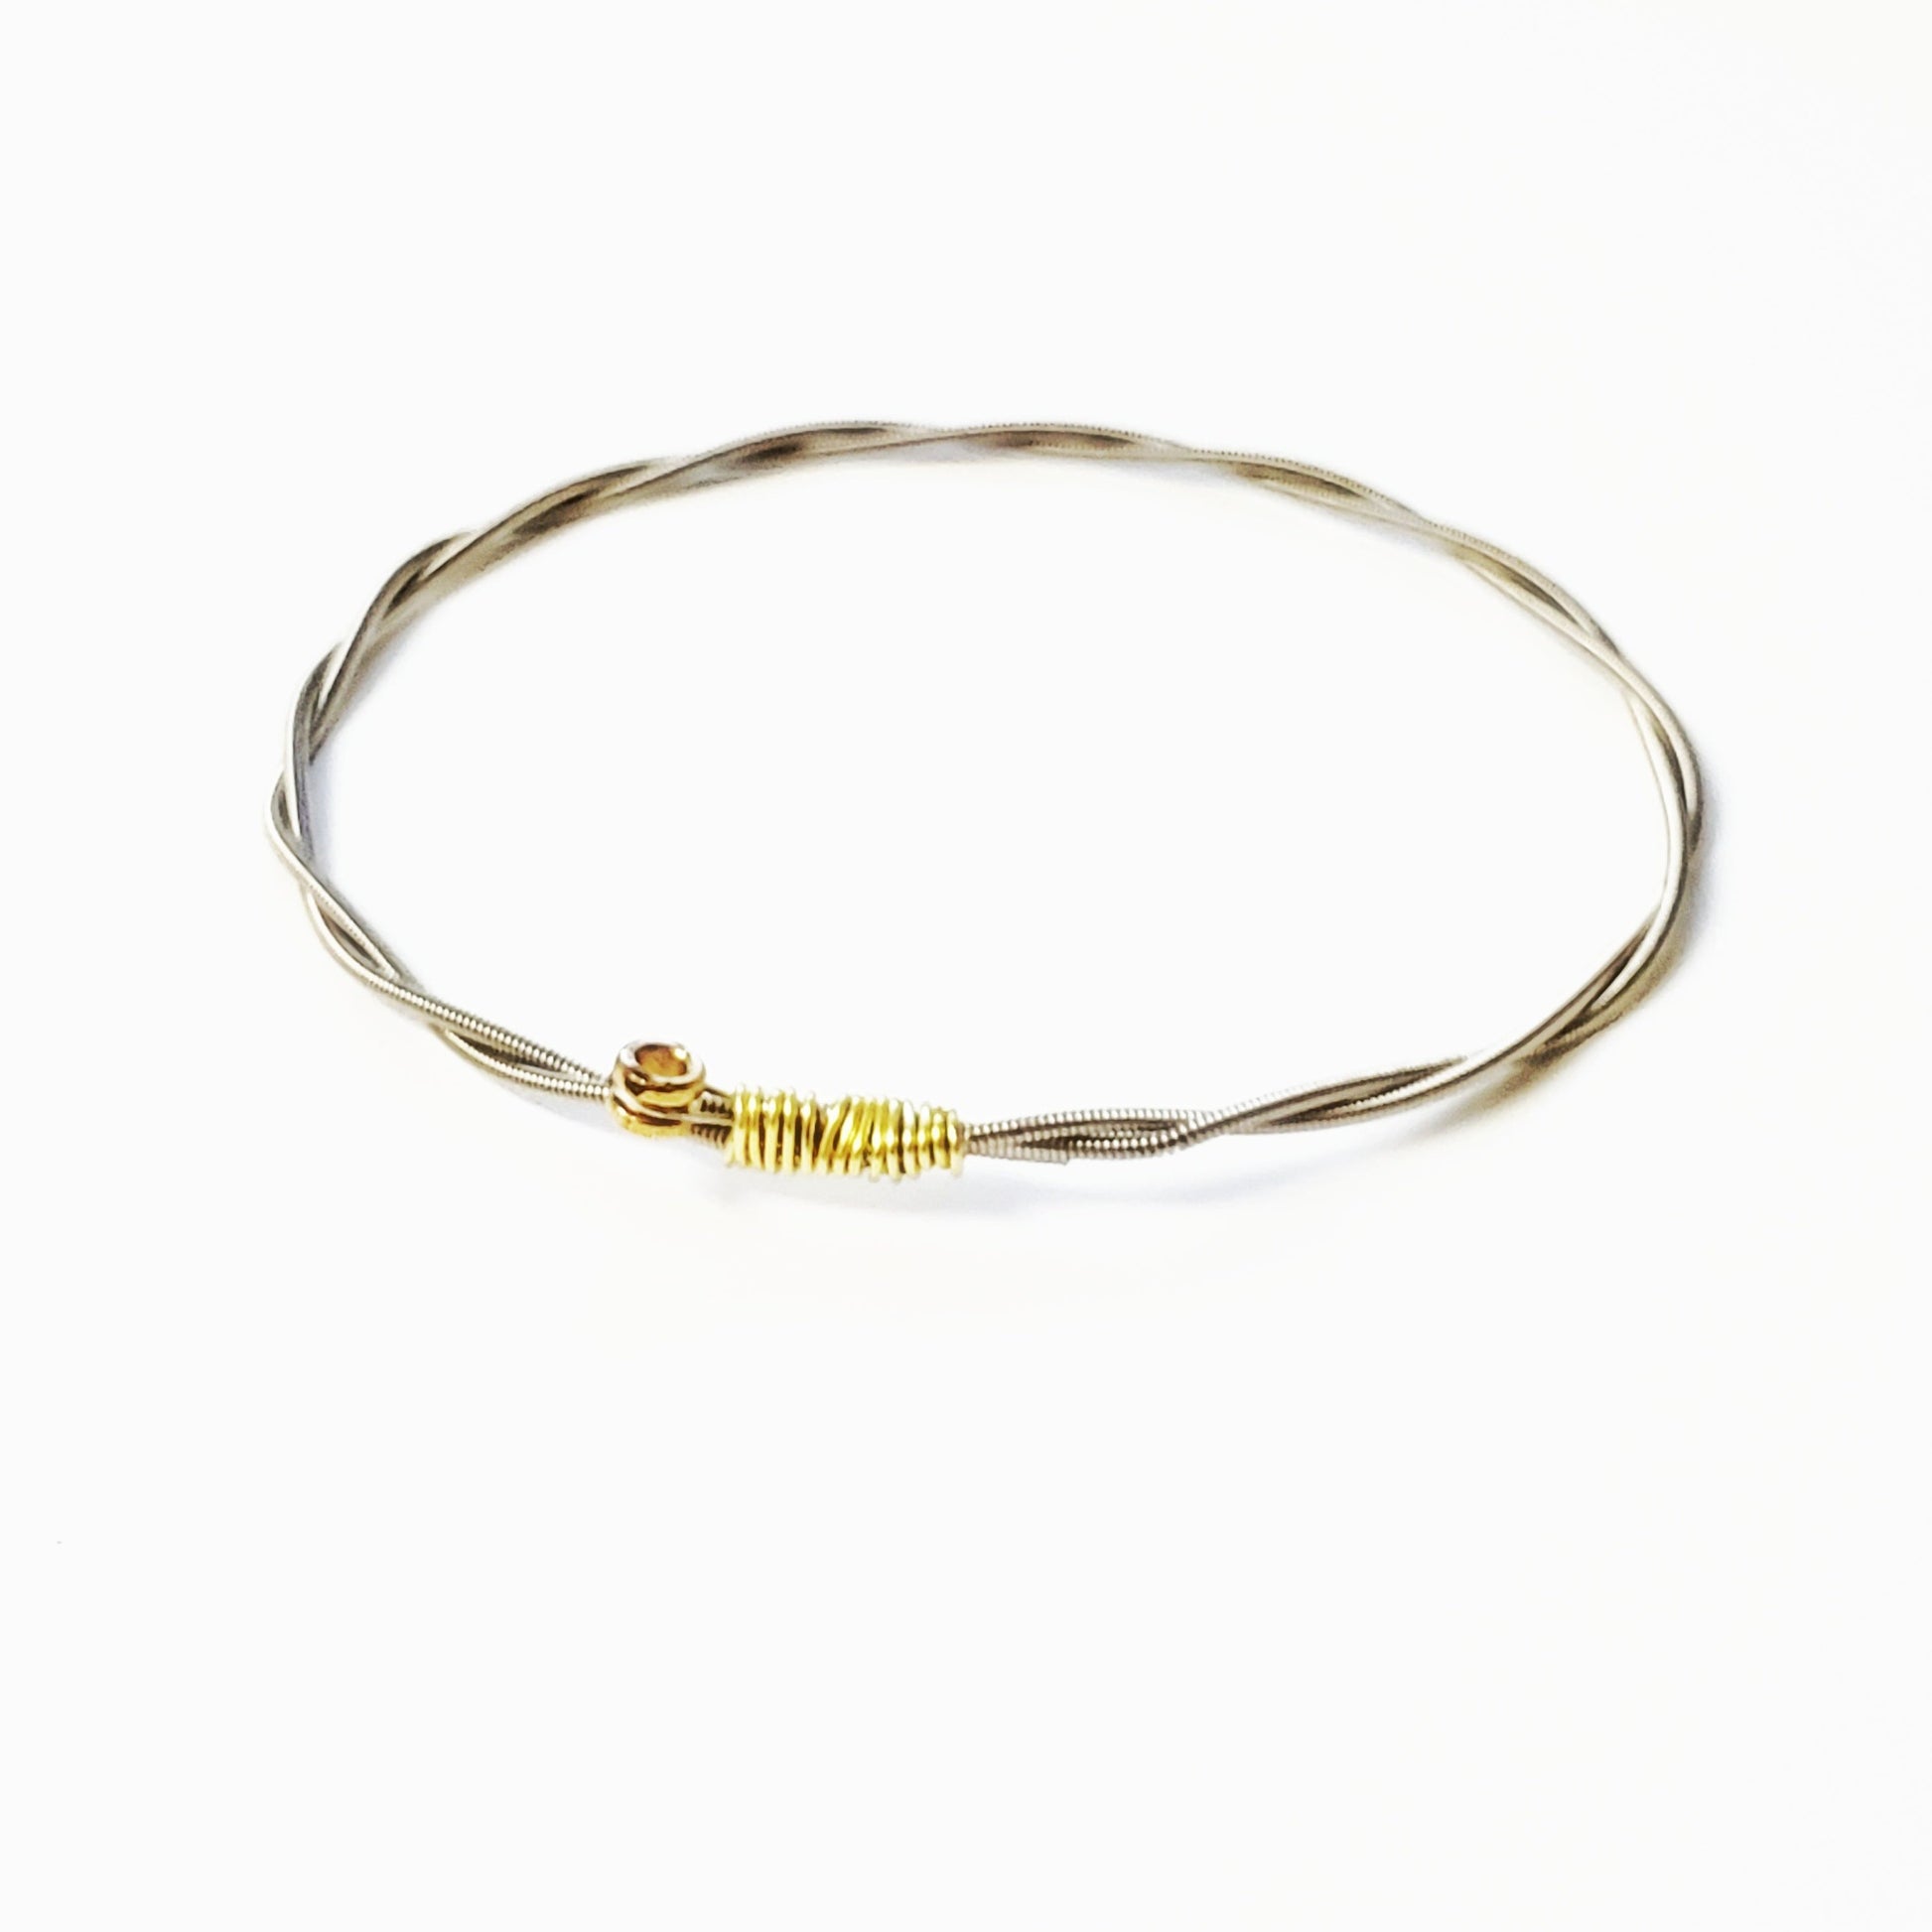 bangle style bracelet made from an upcycled guitar string - white background